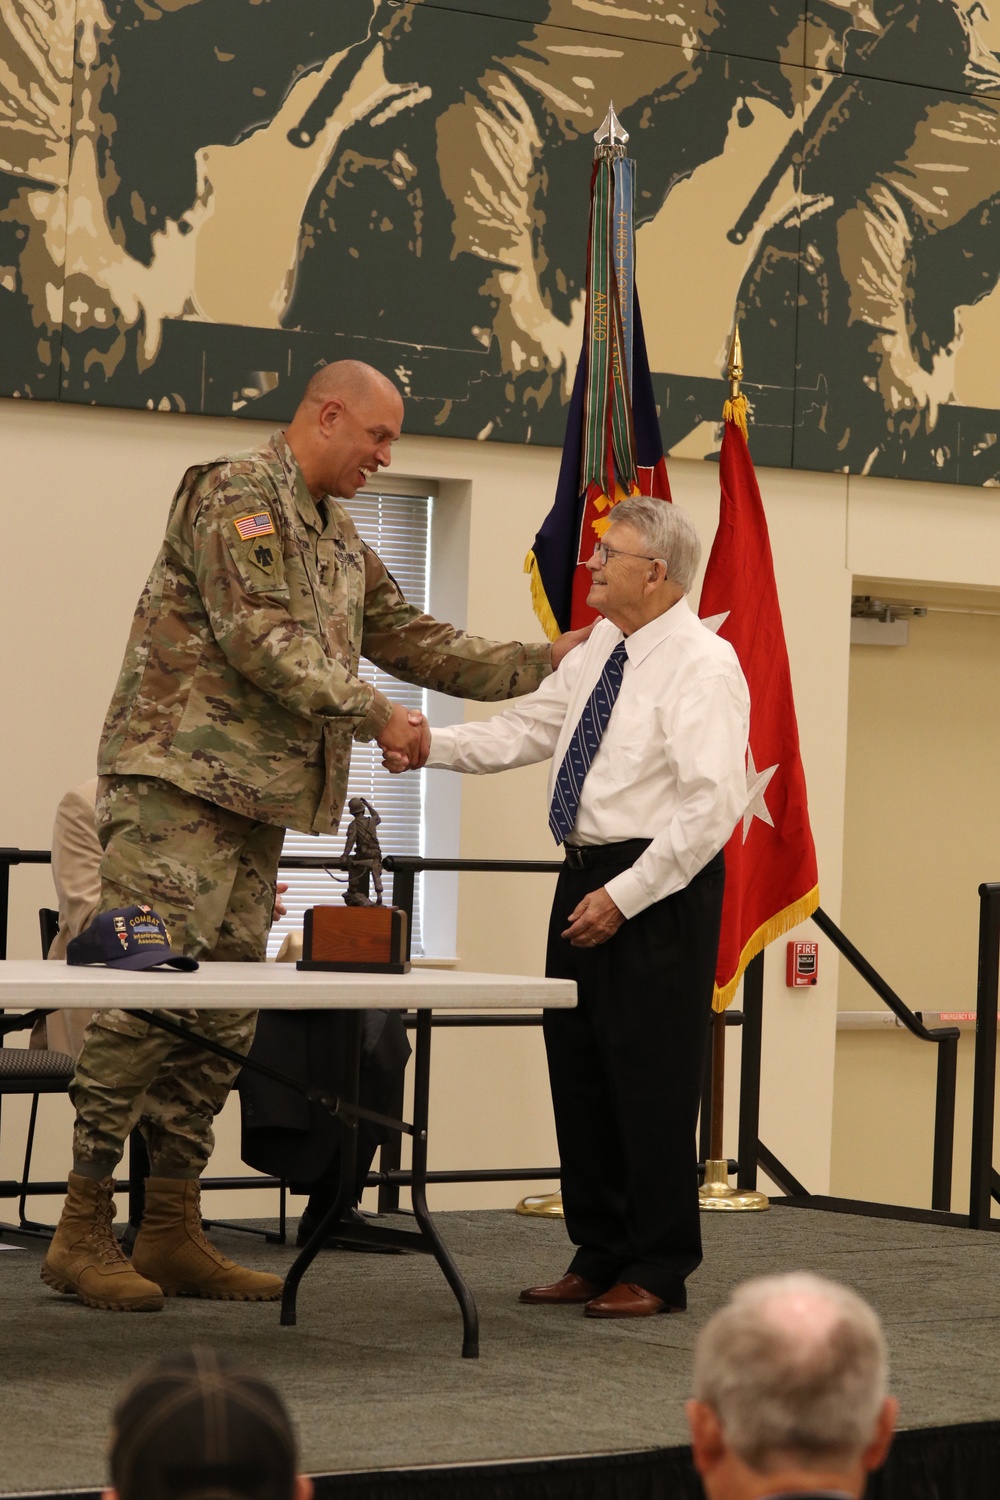 Infantrymen of the Oklahoma Army National Guard receives honor